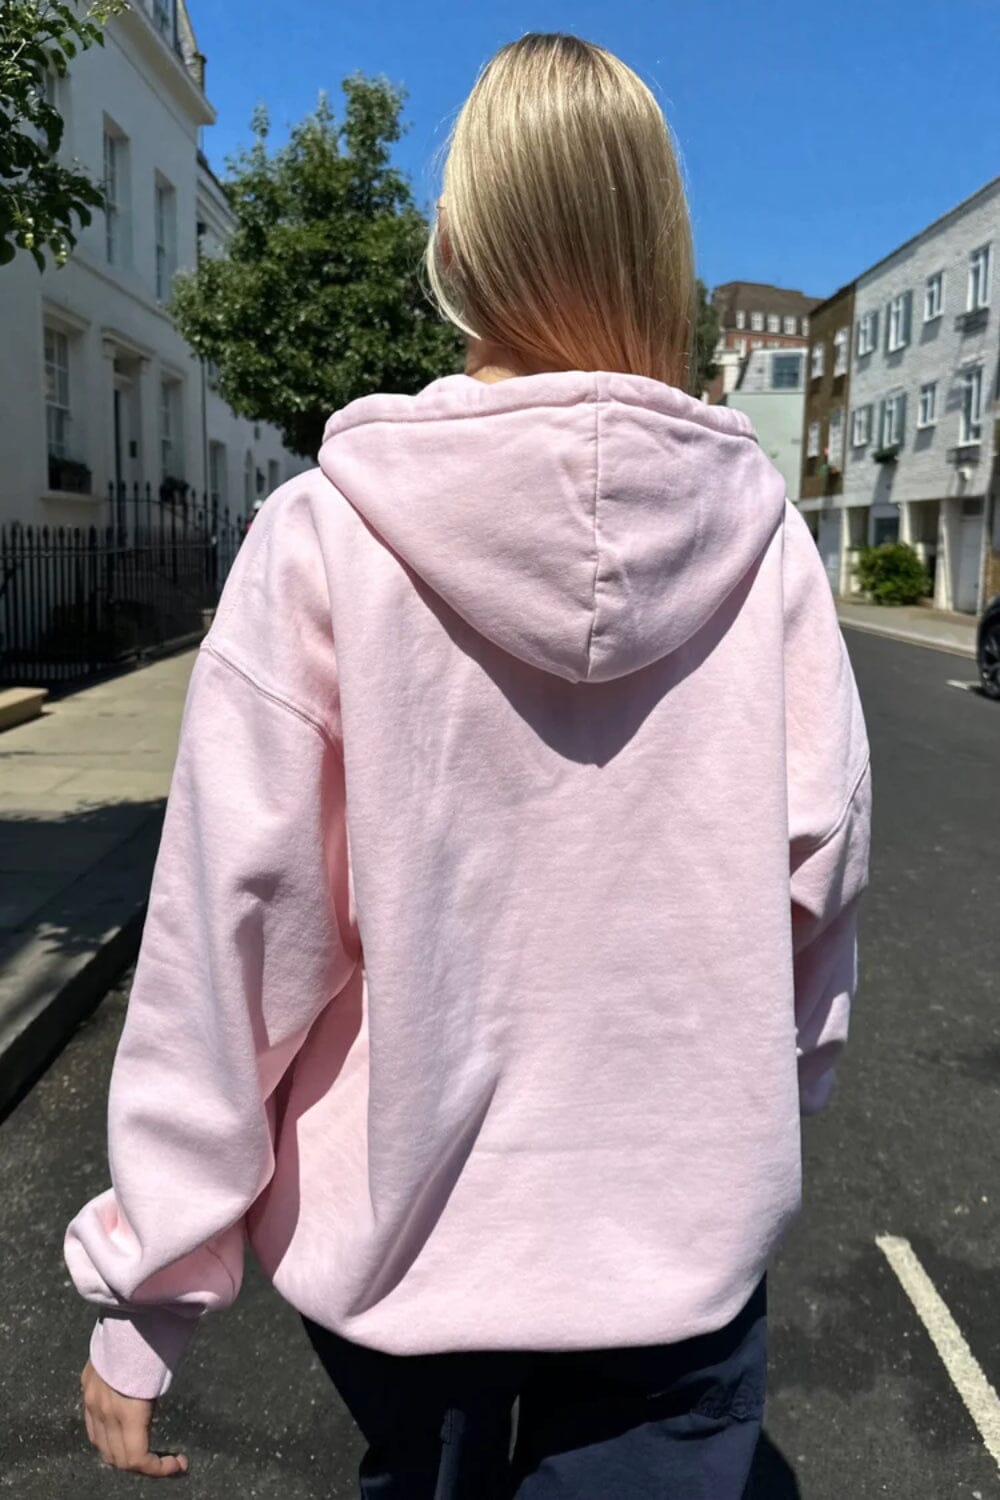 Pastel Pink / Oversized Fit